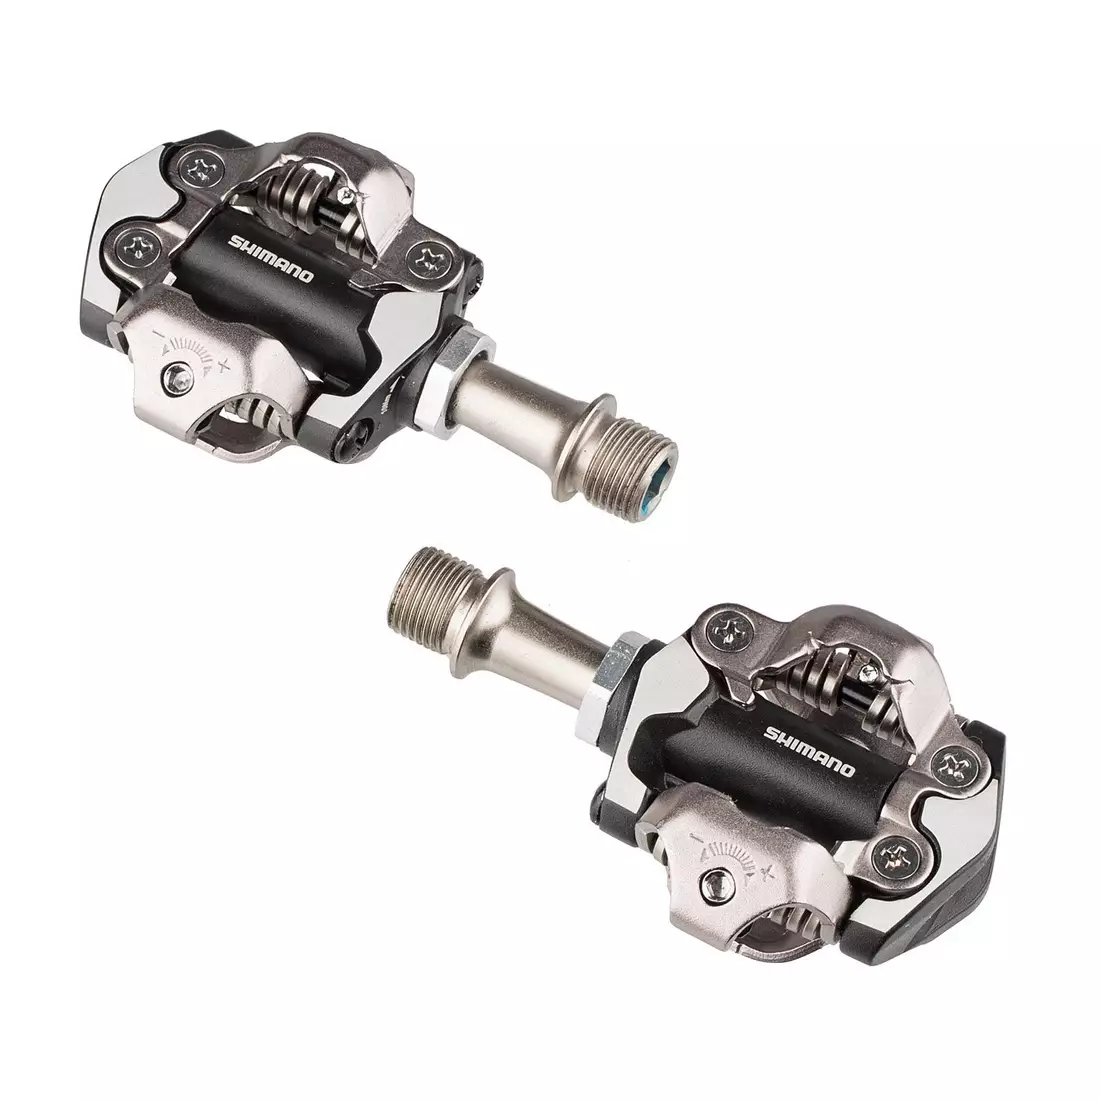 SHIMANO SPD PD-M8000 MTB/trekking bicycle pedals with cleats